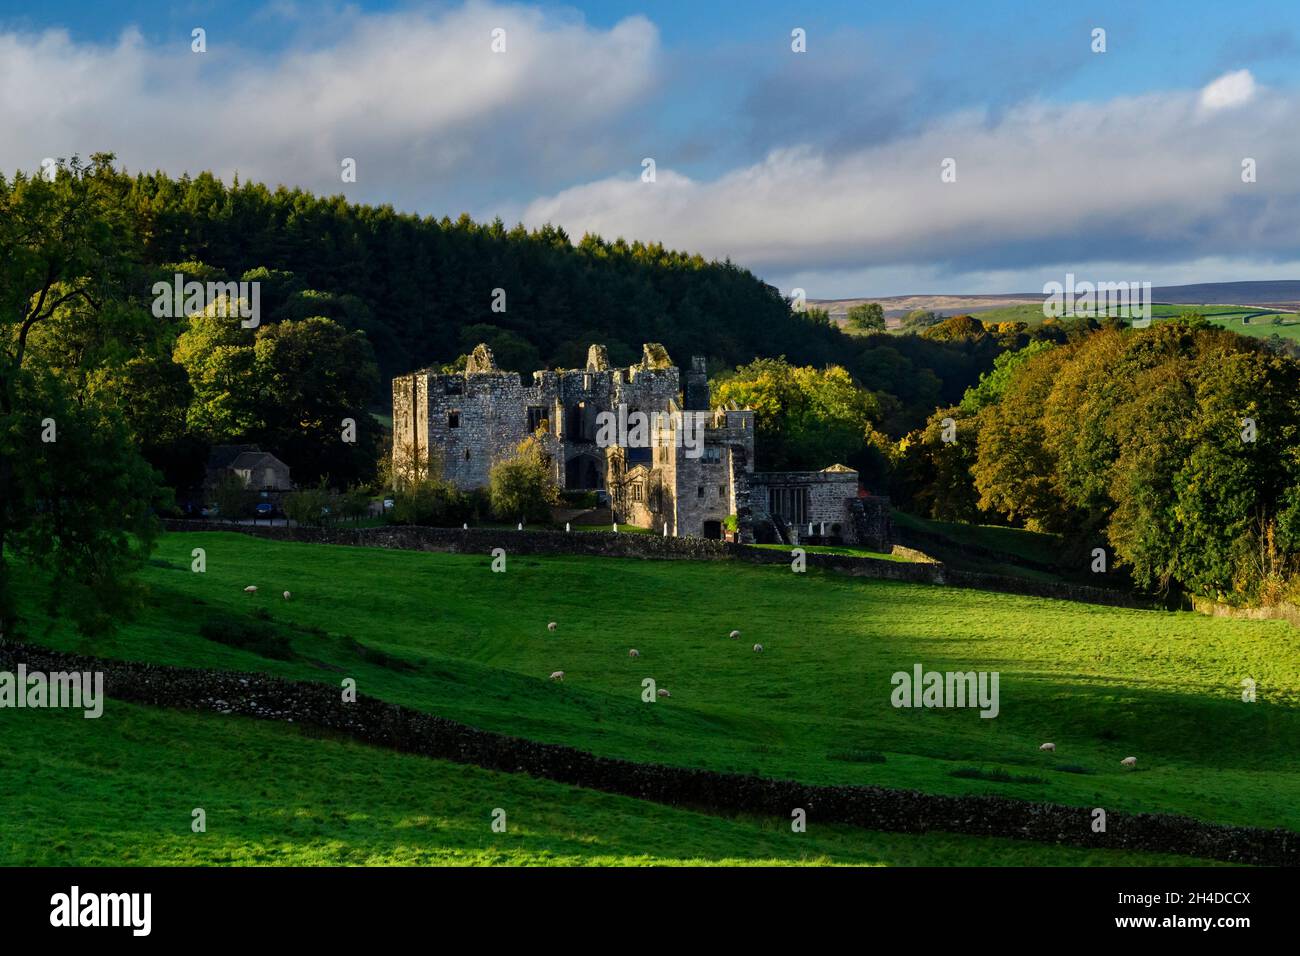 Barden Tower (historic ancient hunting lodge ruin in beautiful countryside setting) - scenic rural Bolton Abbey Estate, Yorkshire Dales, England, UK. Stock Photo